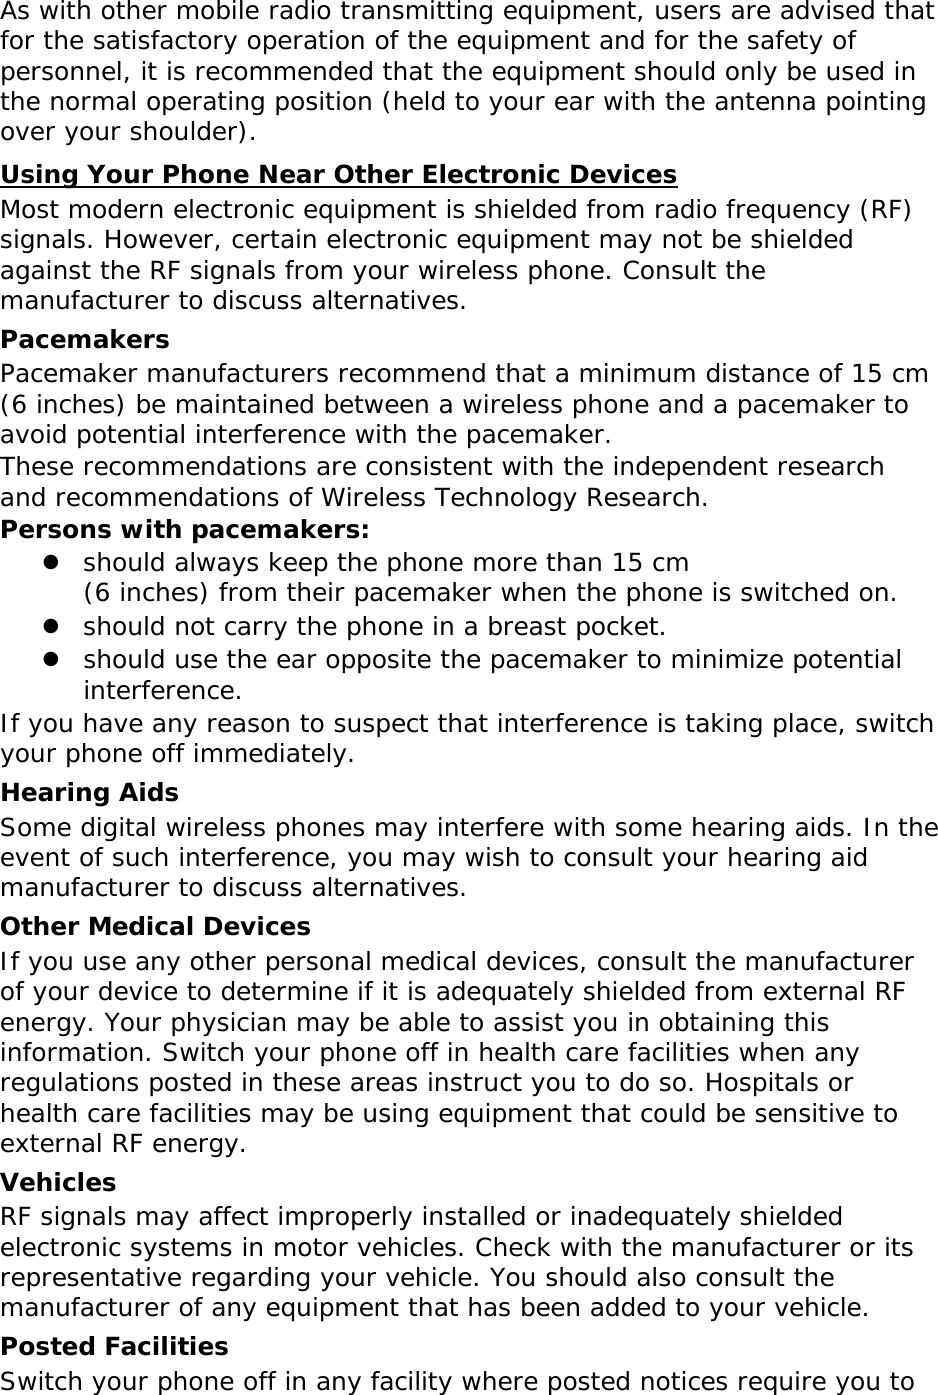 As with other mobile radio transmitting equipment, users are advised that for the satisfactory operation of the equipment and for the safety of personnel, it is recommended that the equipment should only be used in the normal operating position (held to your ear with the antenna pointing over your shoulder). UUsing Your Phone Near Other Electronic Devices Most modern electronic equipment is shielded from radio frequency (RF) signals. However, certain electronic equipment may not be shielded against the RF signals from your wireless phone. Consult the manufacturer to discuss alternatives. Pacemakers Pacemaker manufacturers recommend that a minimum distance of 15 cm (6 inches) be maintained between a wireless phone and a pacemaker to avoid potential interference with the pacemaker. These recommendations are consistent with the independent research and recommendations of Wireless Technology Research. Persons with pacemakers:  should always keep the phone more than 15 cm  (6 inches) from their pacemaker when the phone is switched on.  should not carry the phone in a breast pocket.  should use the ear opposite the pacemaker to minimize potential interference. If you have any reason to suspect that interference is taking place, switch your phone off immediately. Hearing Aids Some digital wireless phones may interfere with some hearing aids. In the event of such interference, you may wish to consult your hearing aid manufacturer to discuss alternatives. Other Medical Devices If you use any other personal medical devices, consult the manufacturer of your device to determine if it is adequately shielded from external RF energy. Your physician may be able to assist you in obtaining this information. Switch your phone off in health care facilities when any regulations posted in these areas instruct you to do so. Hospitals or health care facilities may be using equipment that could be sensitive to external RF energy. Vehicles RF signals may affect improperly installed or inadequately shielded electronic systems in motor vehicles. Check with the manufacturer or its representative regarding your vehicle. You should also consult the manufacturer of any equipment that has been added to your vehicle. Posted Facilities Switch your phone off in any facility where posted notices require you to 